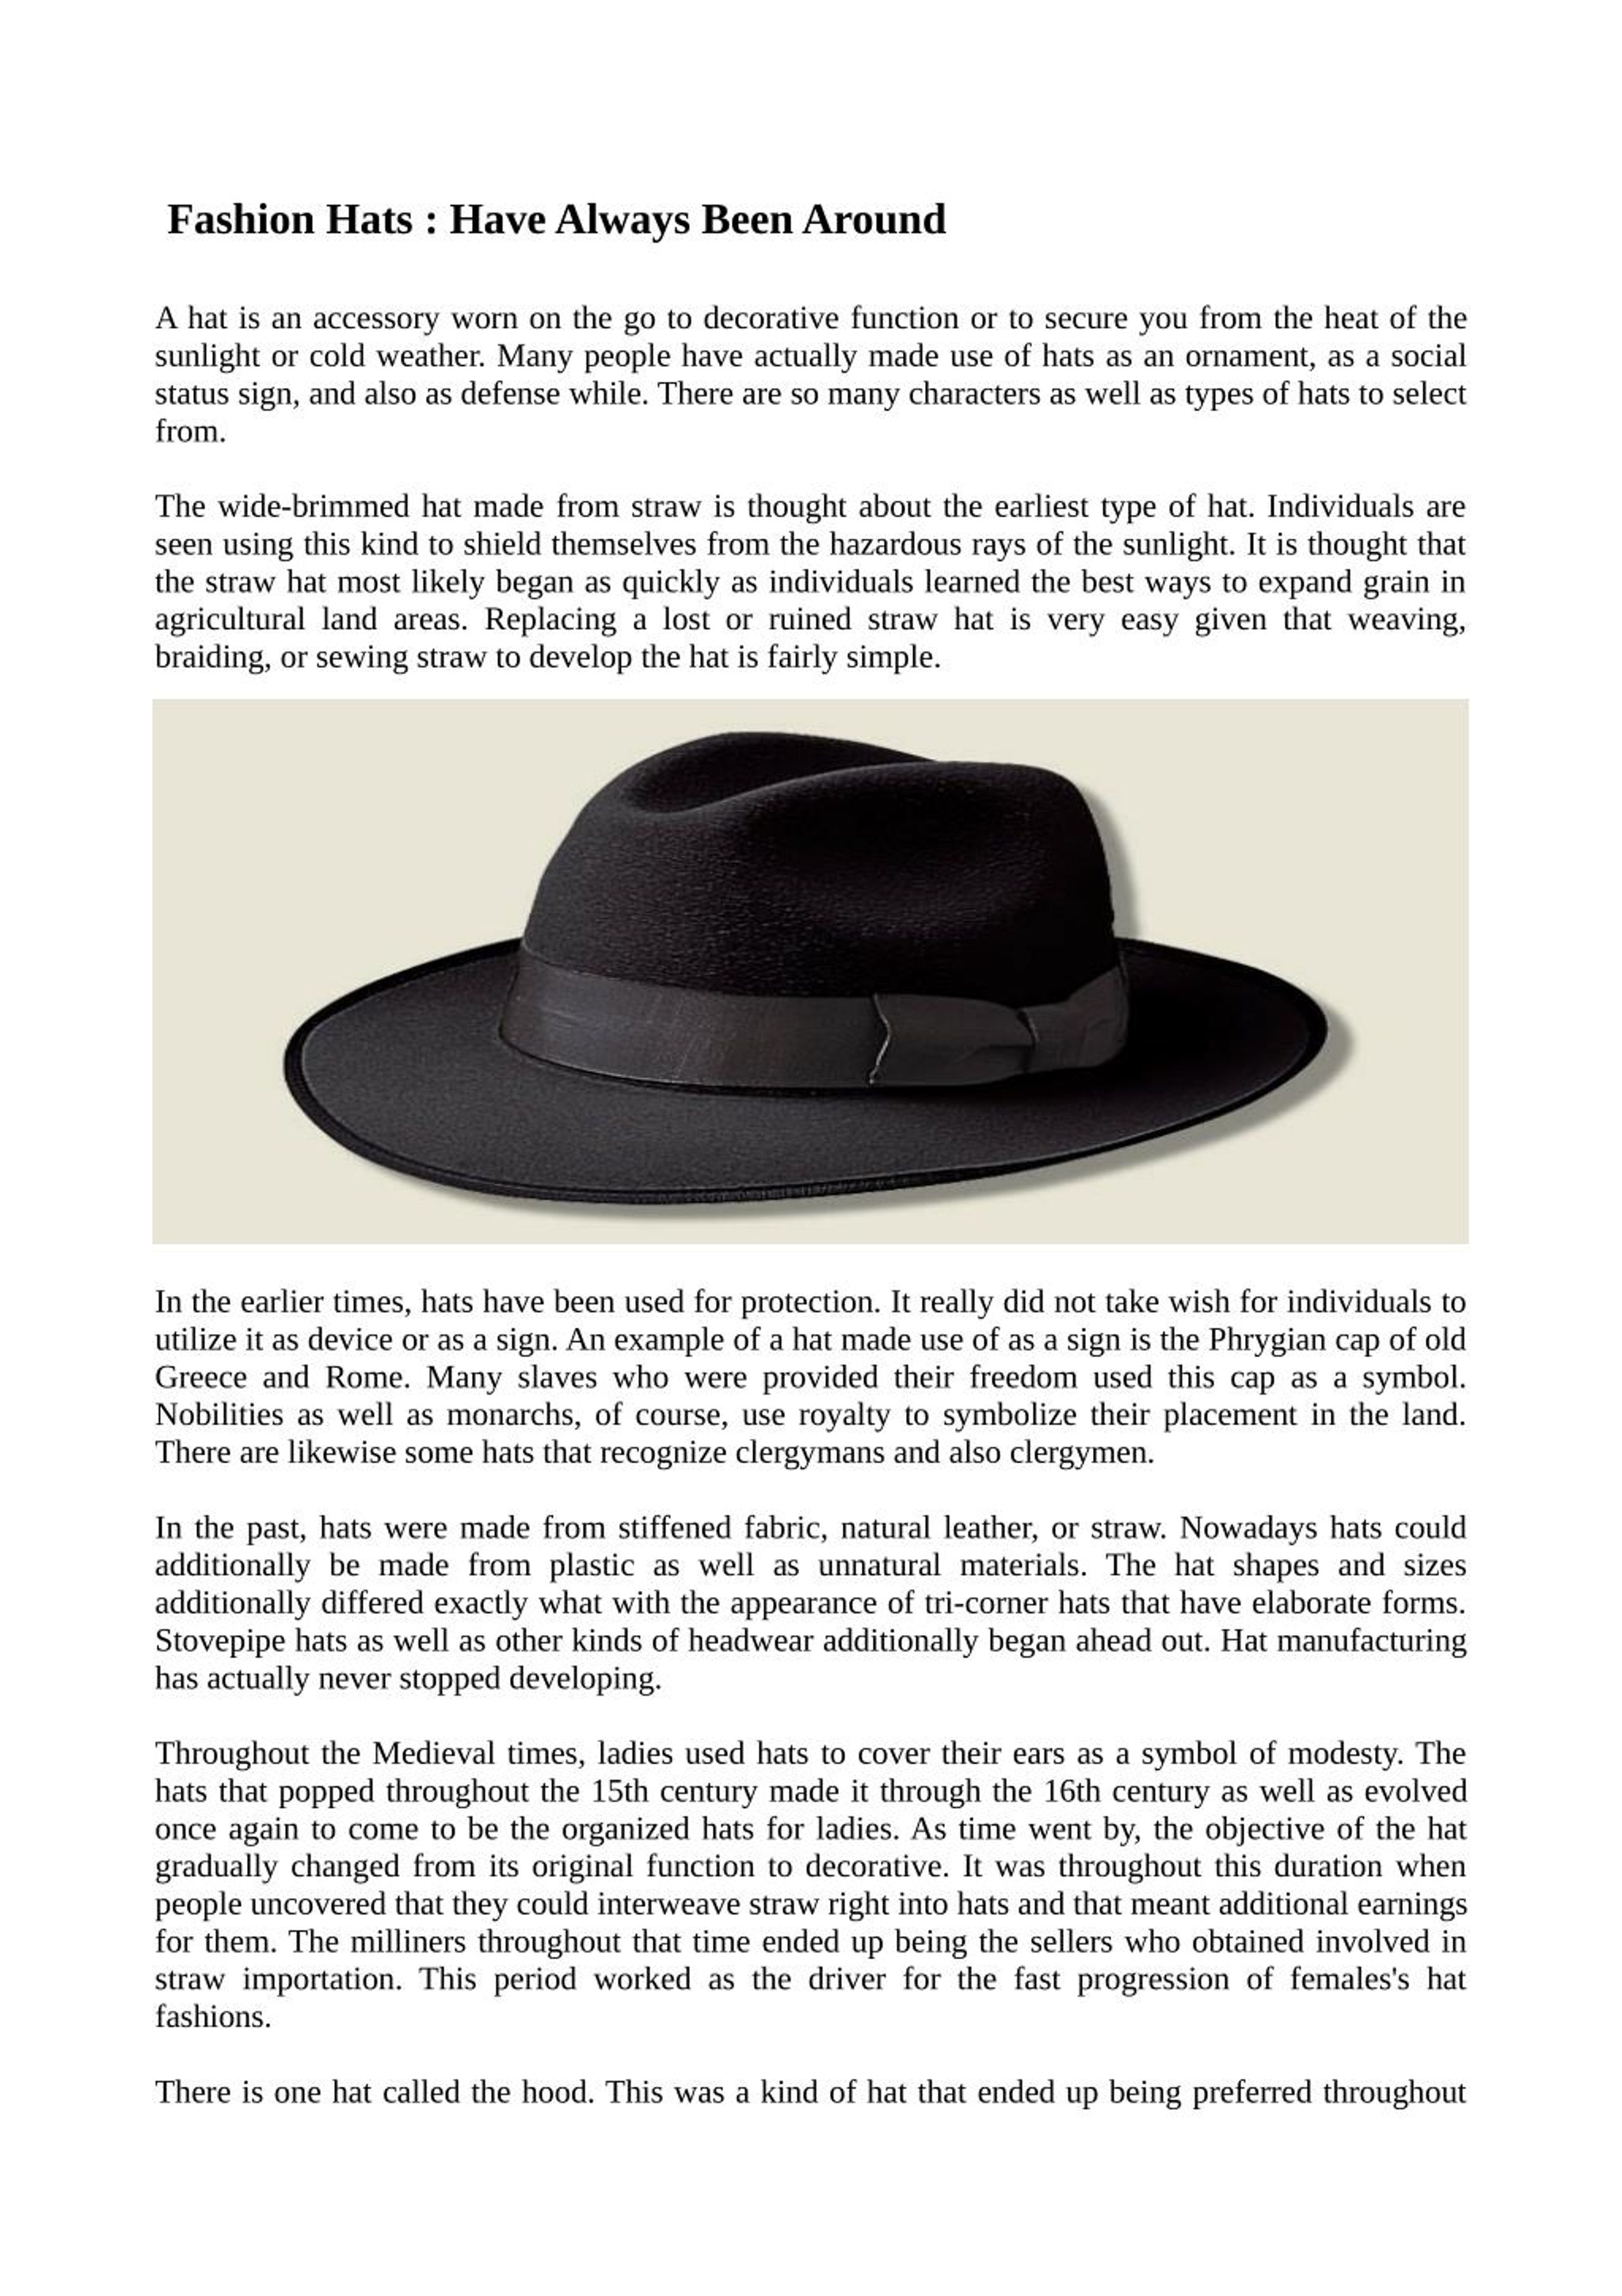 Перевести шляпа. Kinds of hats. Different hats in English. Types of hats. Types of hats in English.